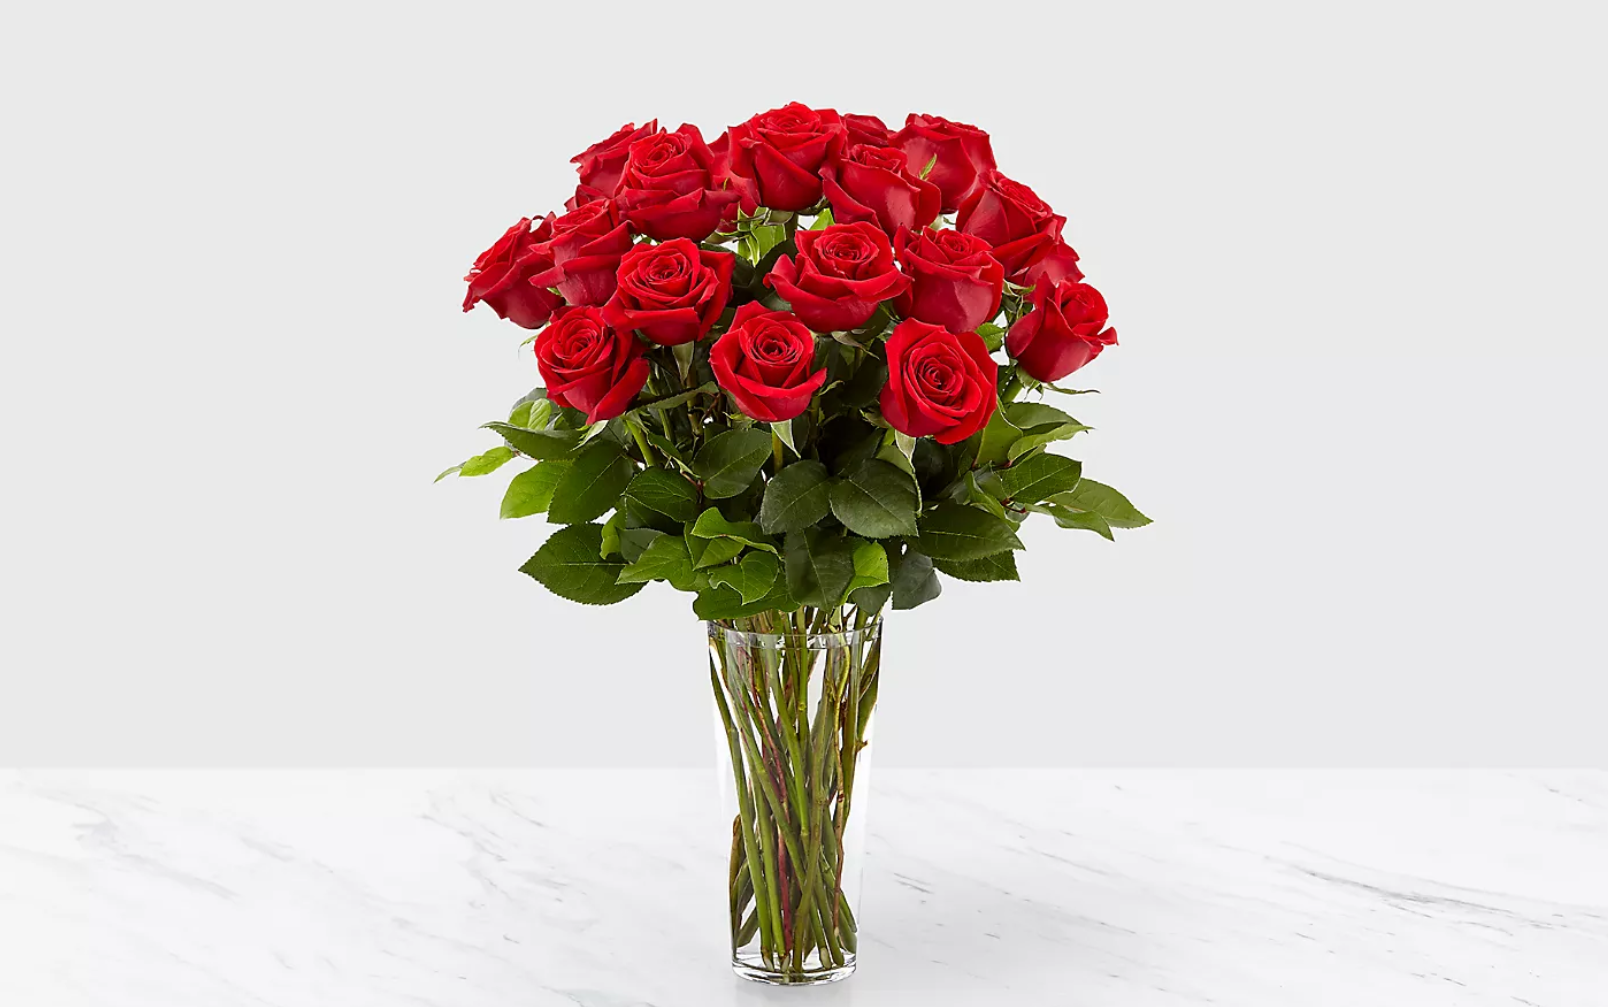 Beautiful Fresh Flower Arrangement of Red Roses, Gift Box and Text Wish,  Birthday Greeting Card Concept. Stock Image - Image of blossom, love:  132771025